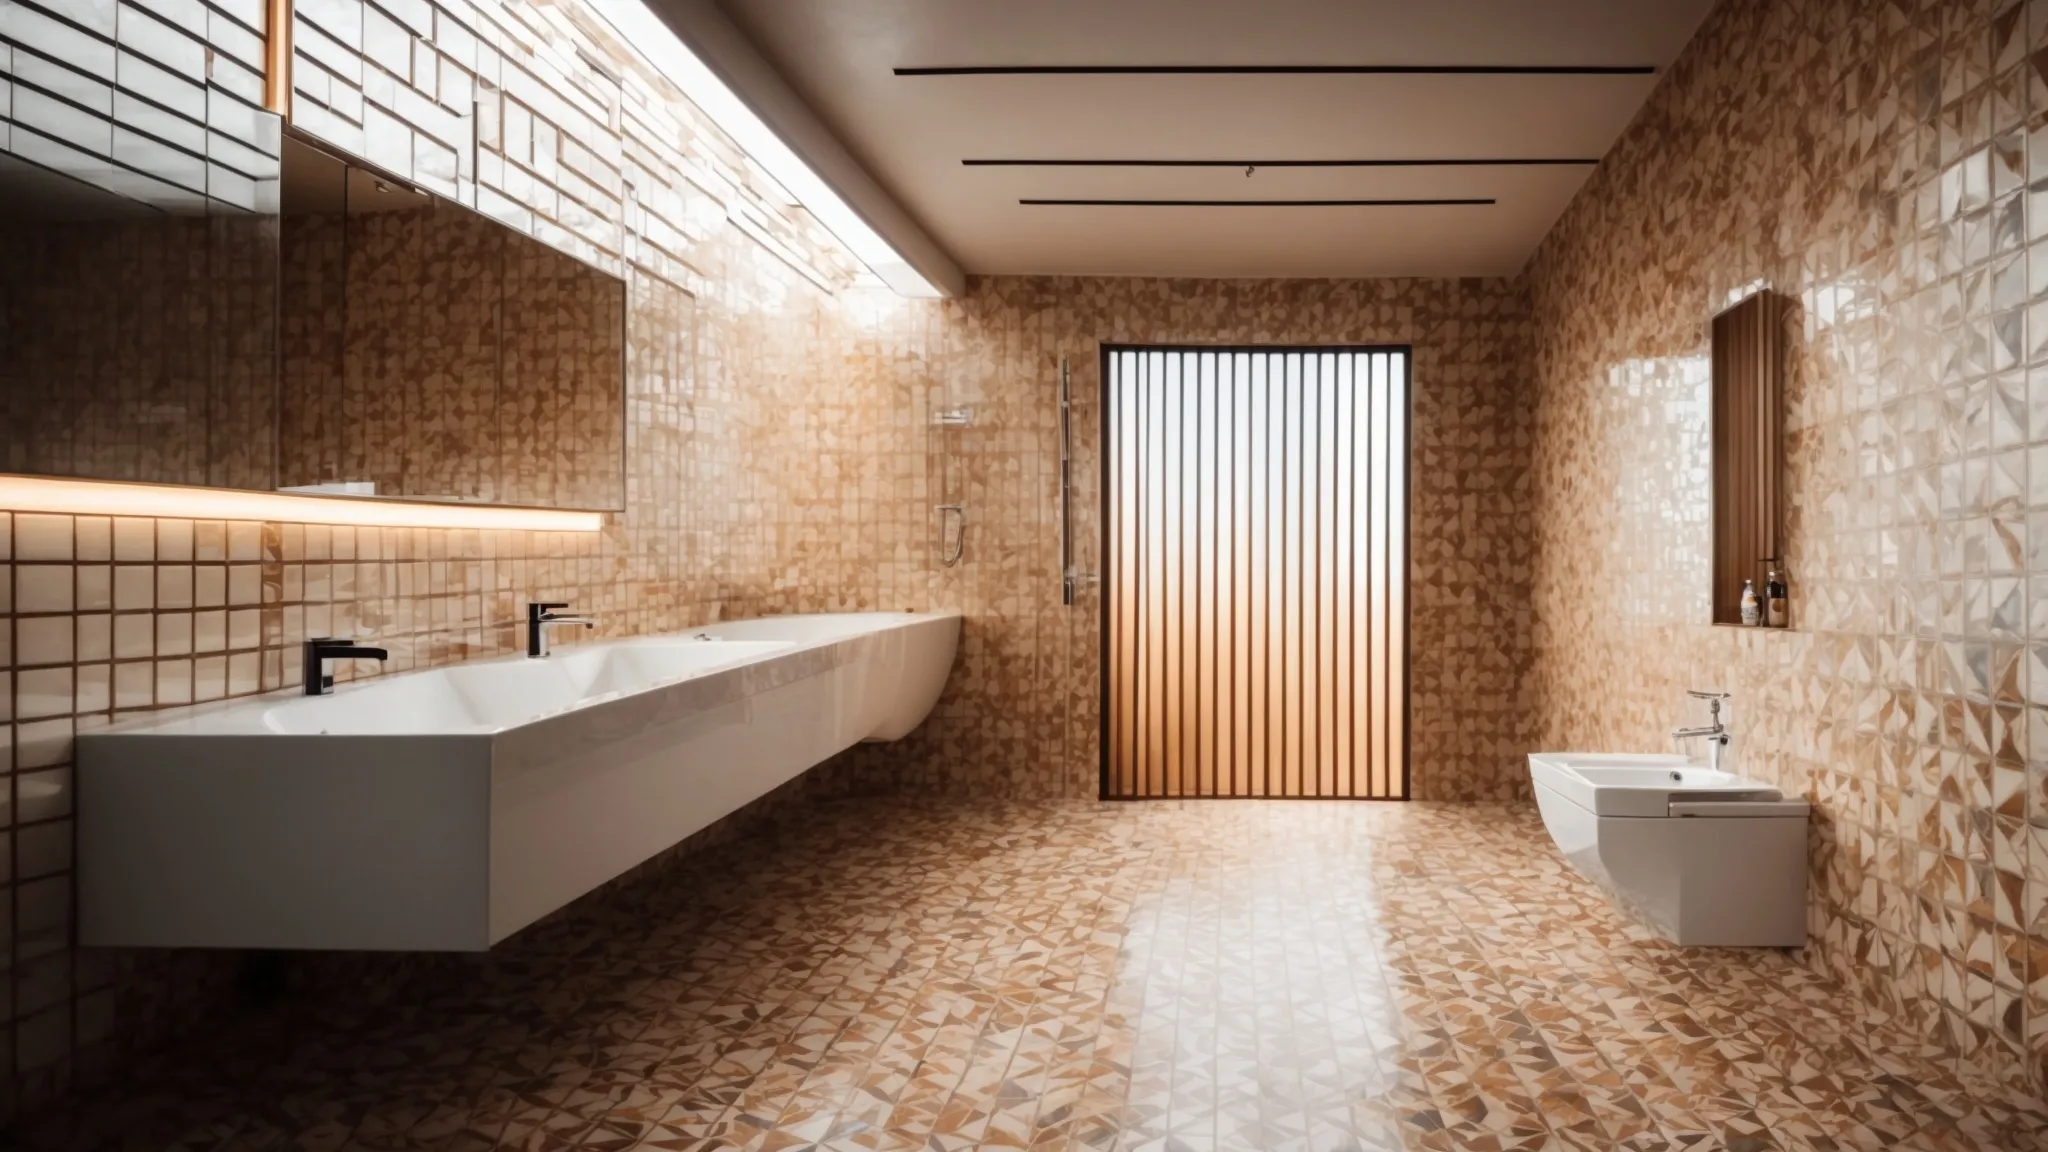 a bathroom radiant with geometric patterned tiles that cover both the floor and the walls, creating a captivating and unique visual feast.